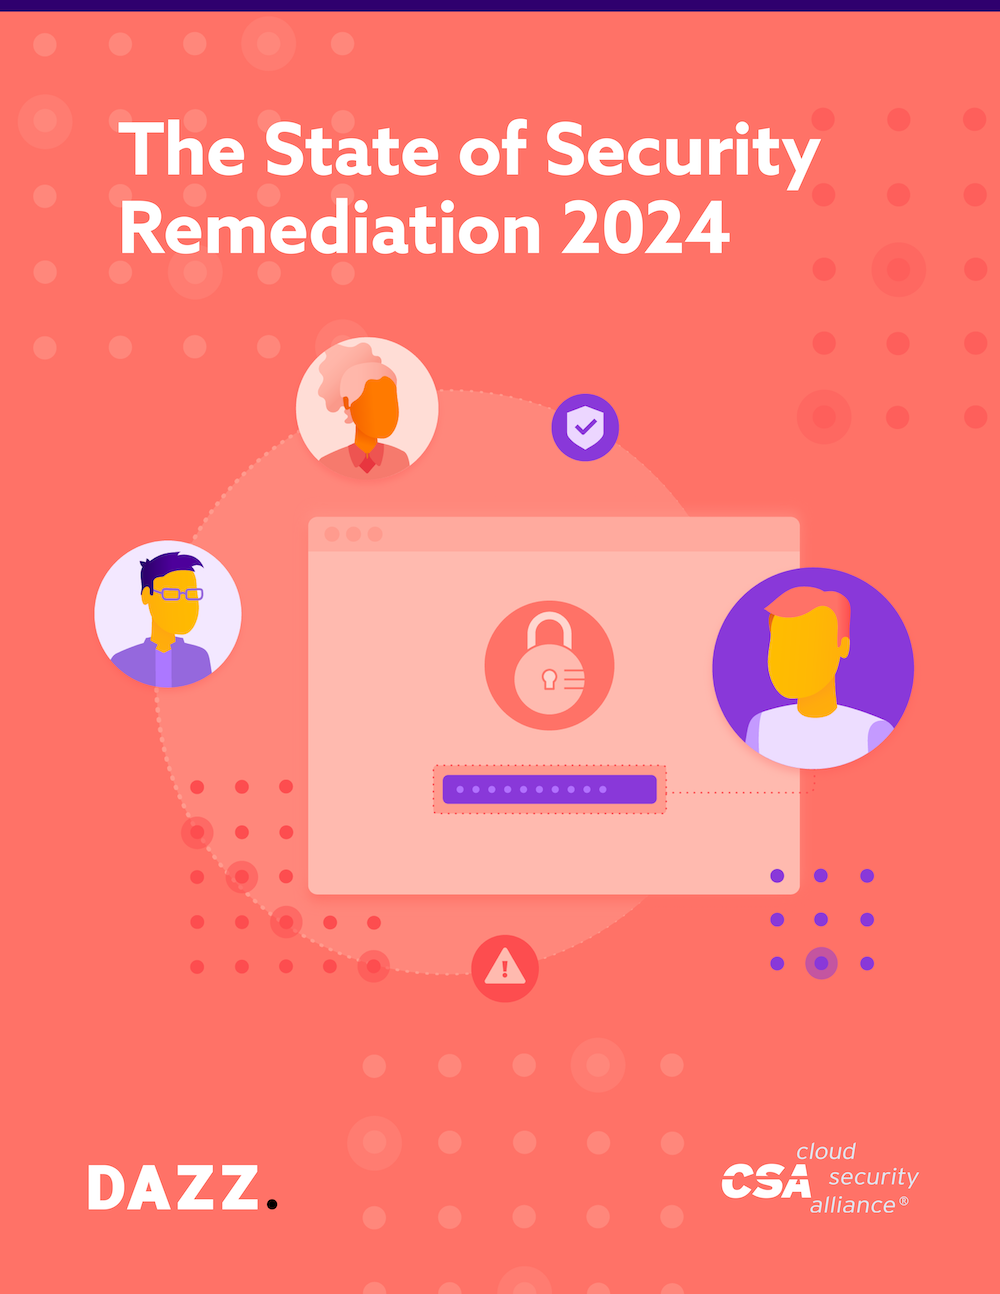 The State of Security Remediation 2024